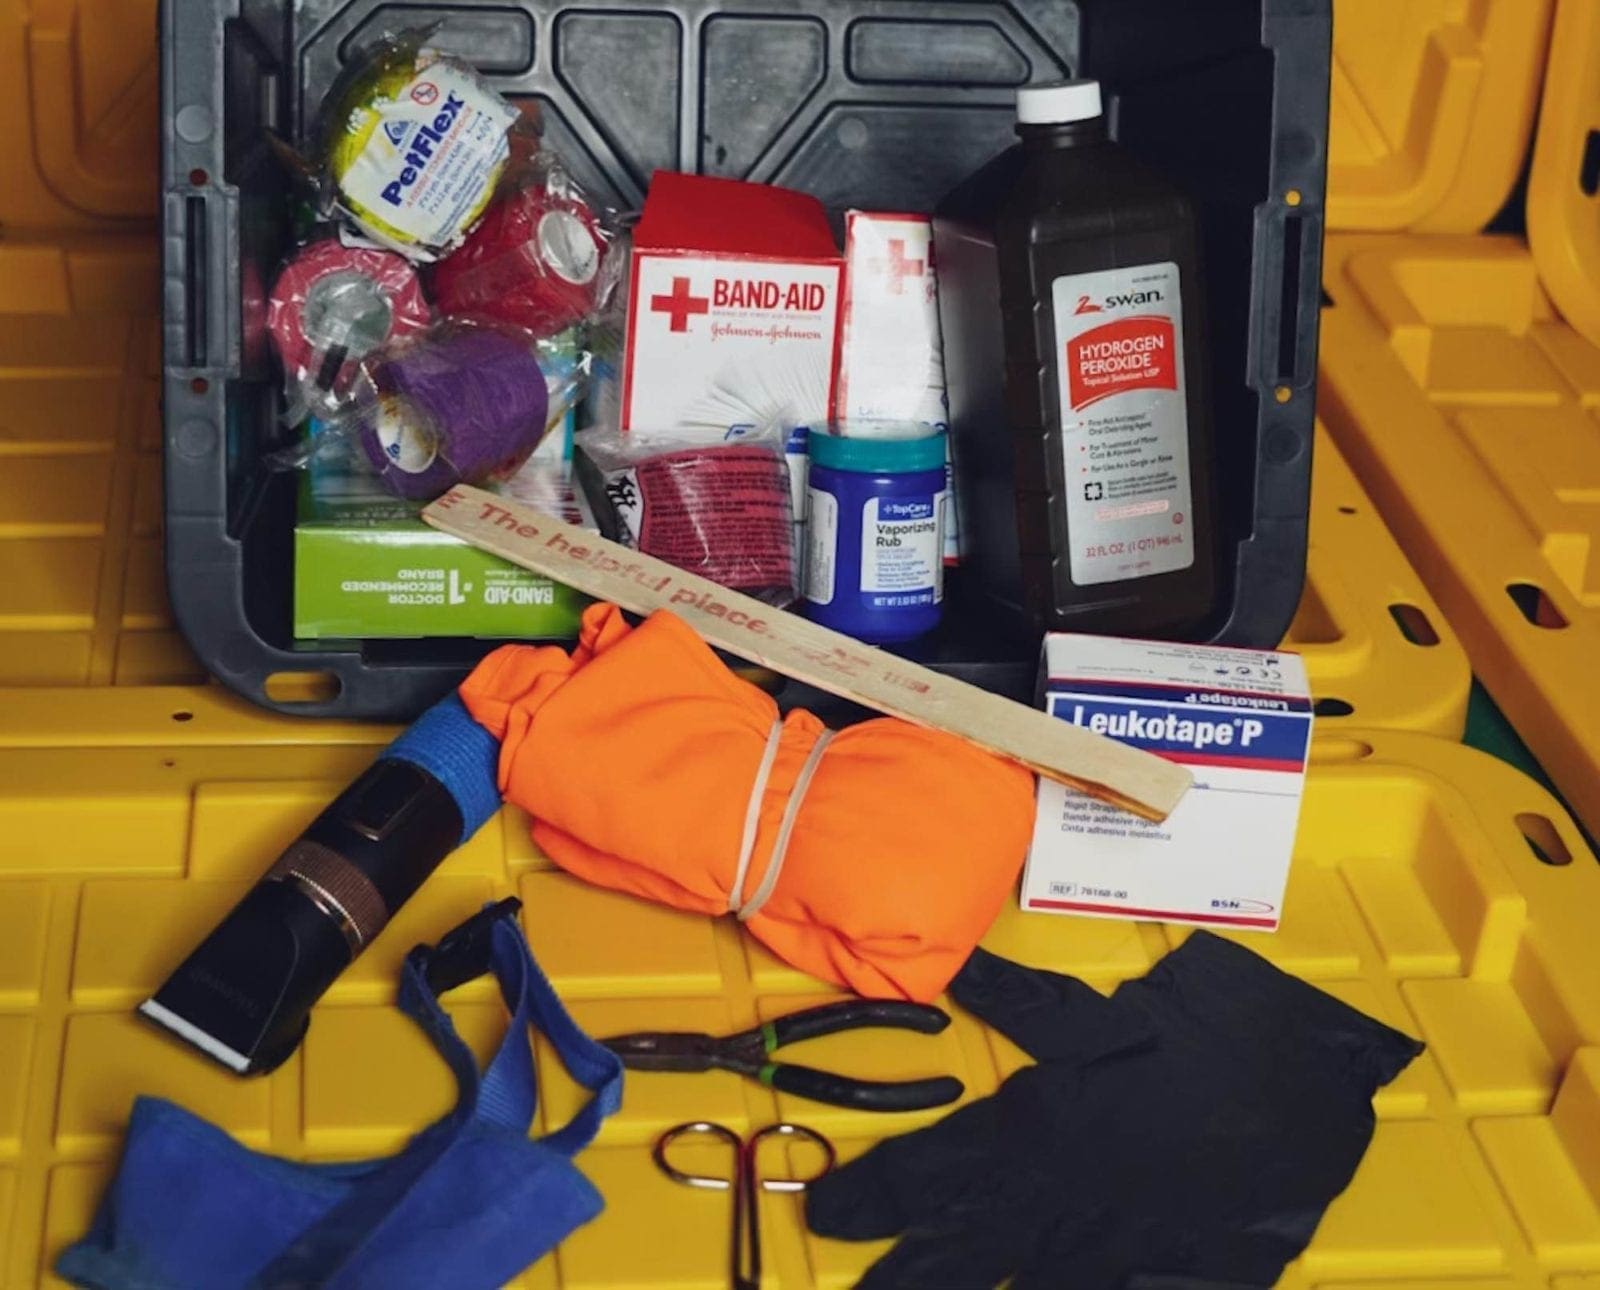 Contents of a dog first aid kit